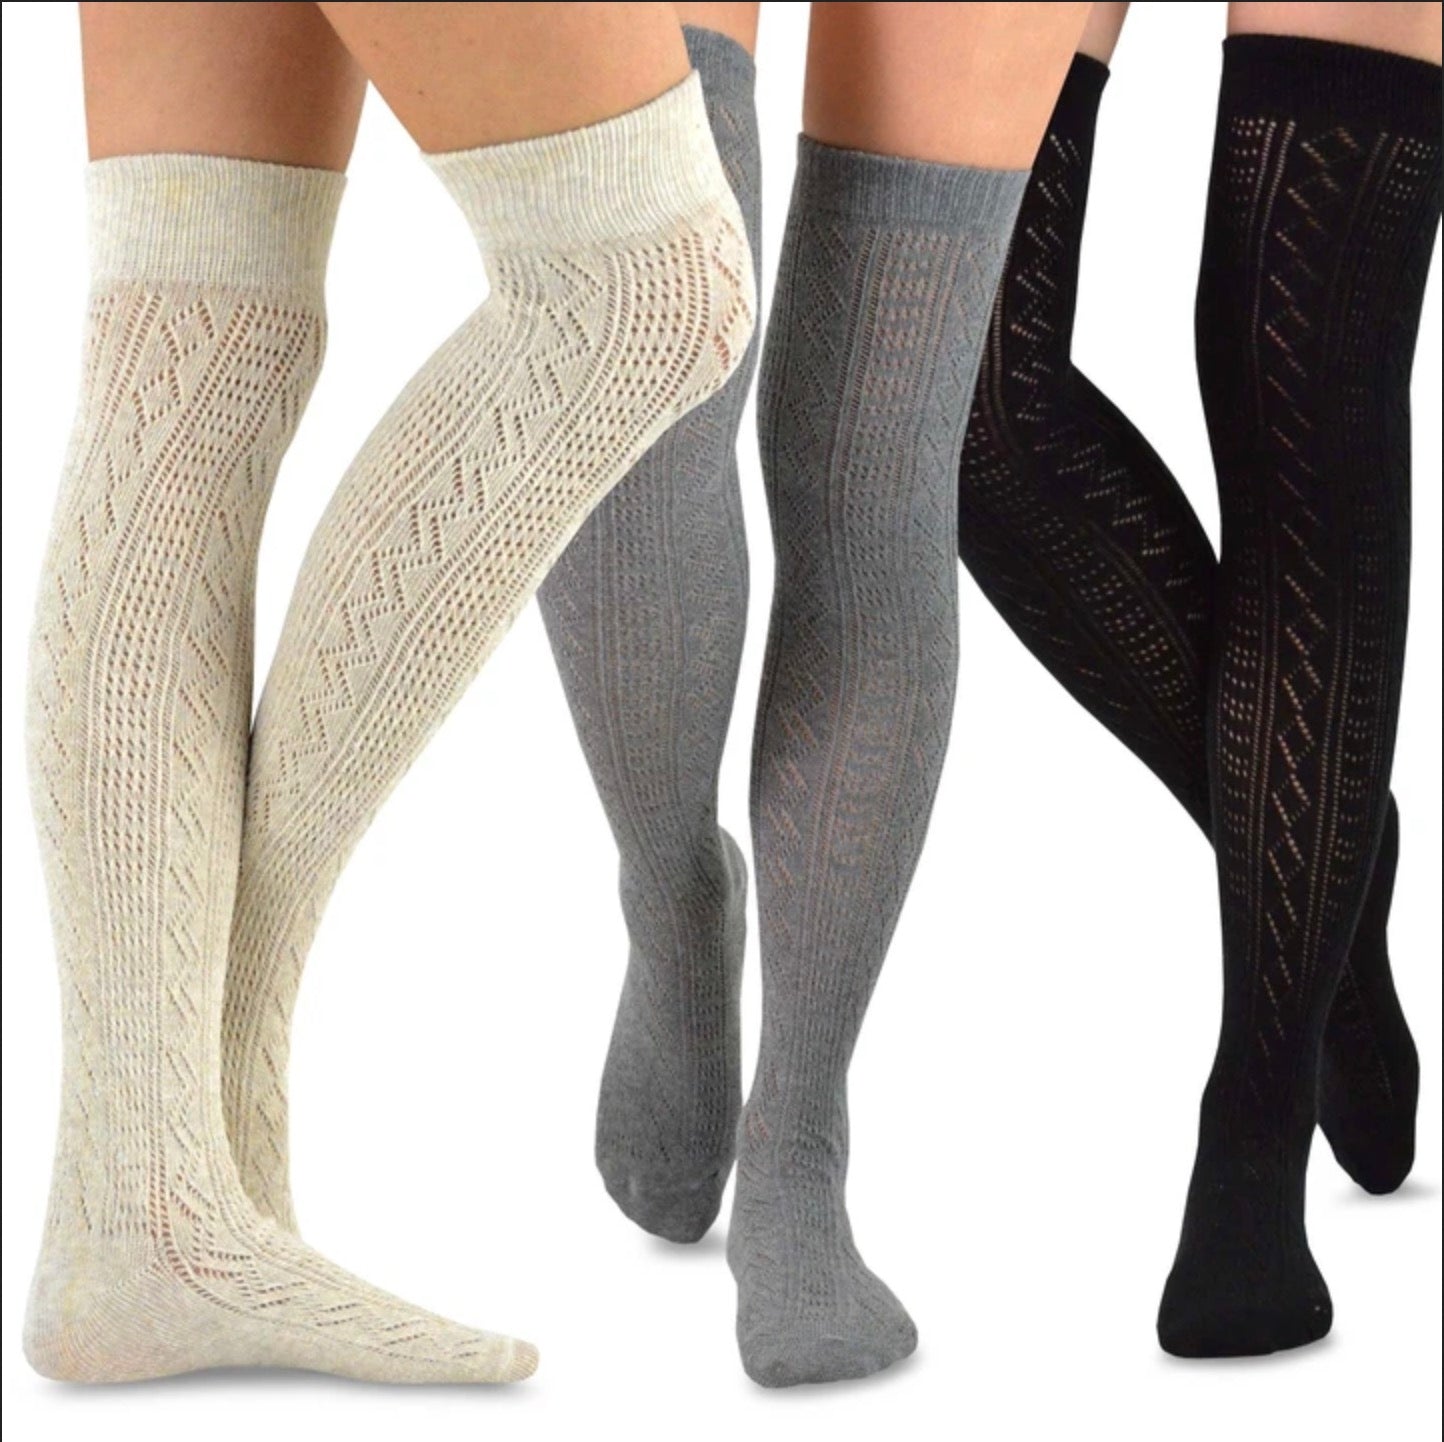 Women's Acrylic Over The Knee High Assorted 3-Pack